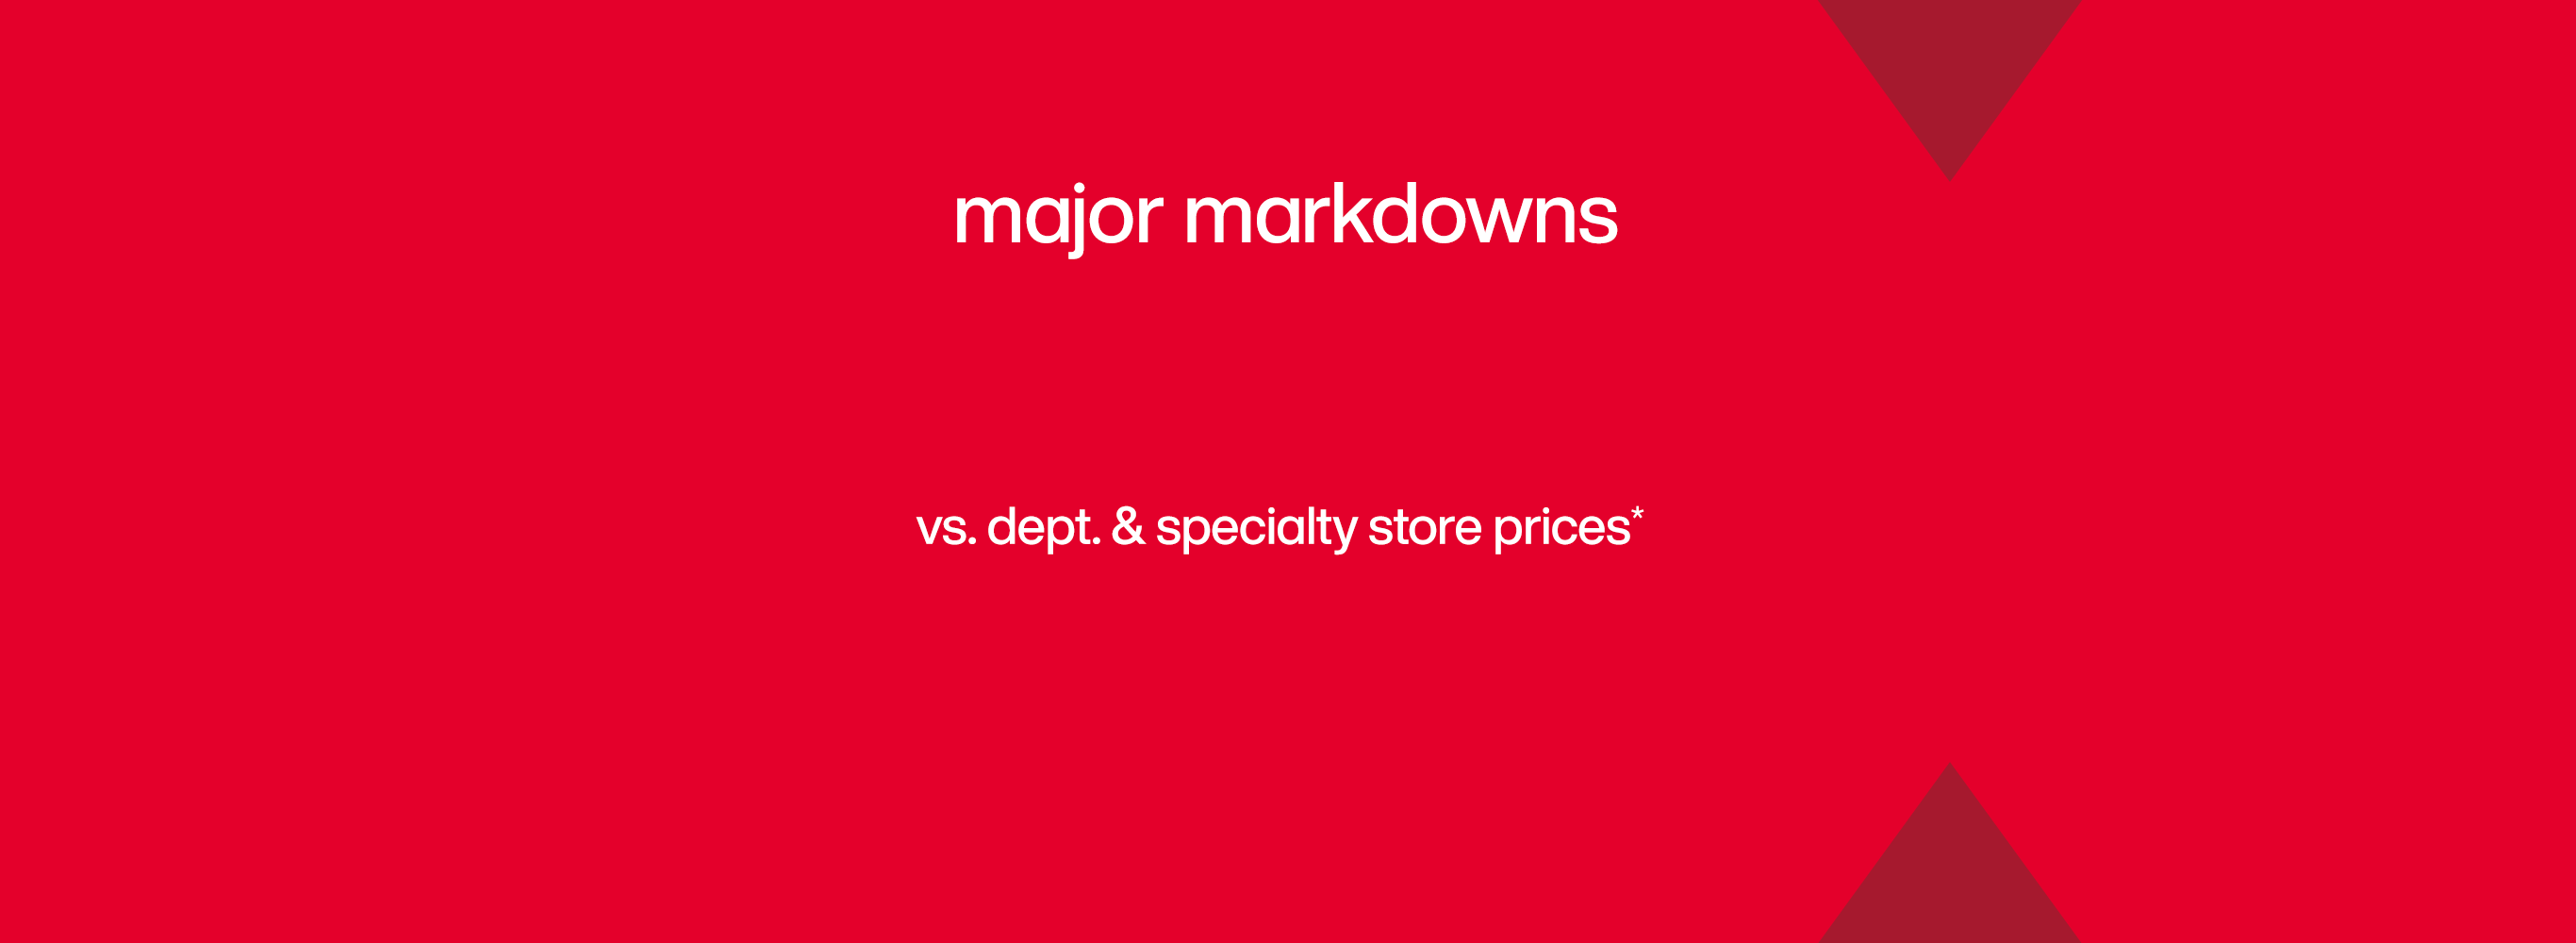 Major markdowns versus department and specialty store prices.*